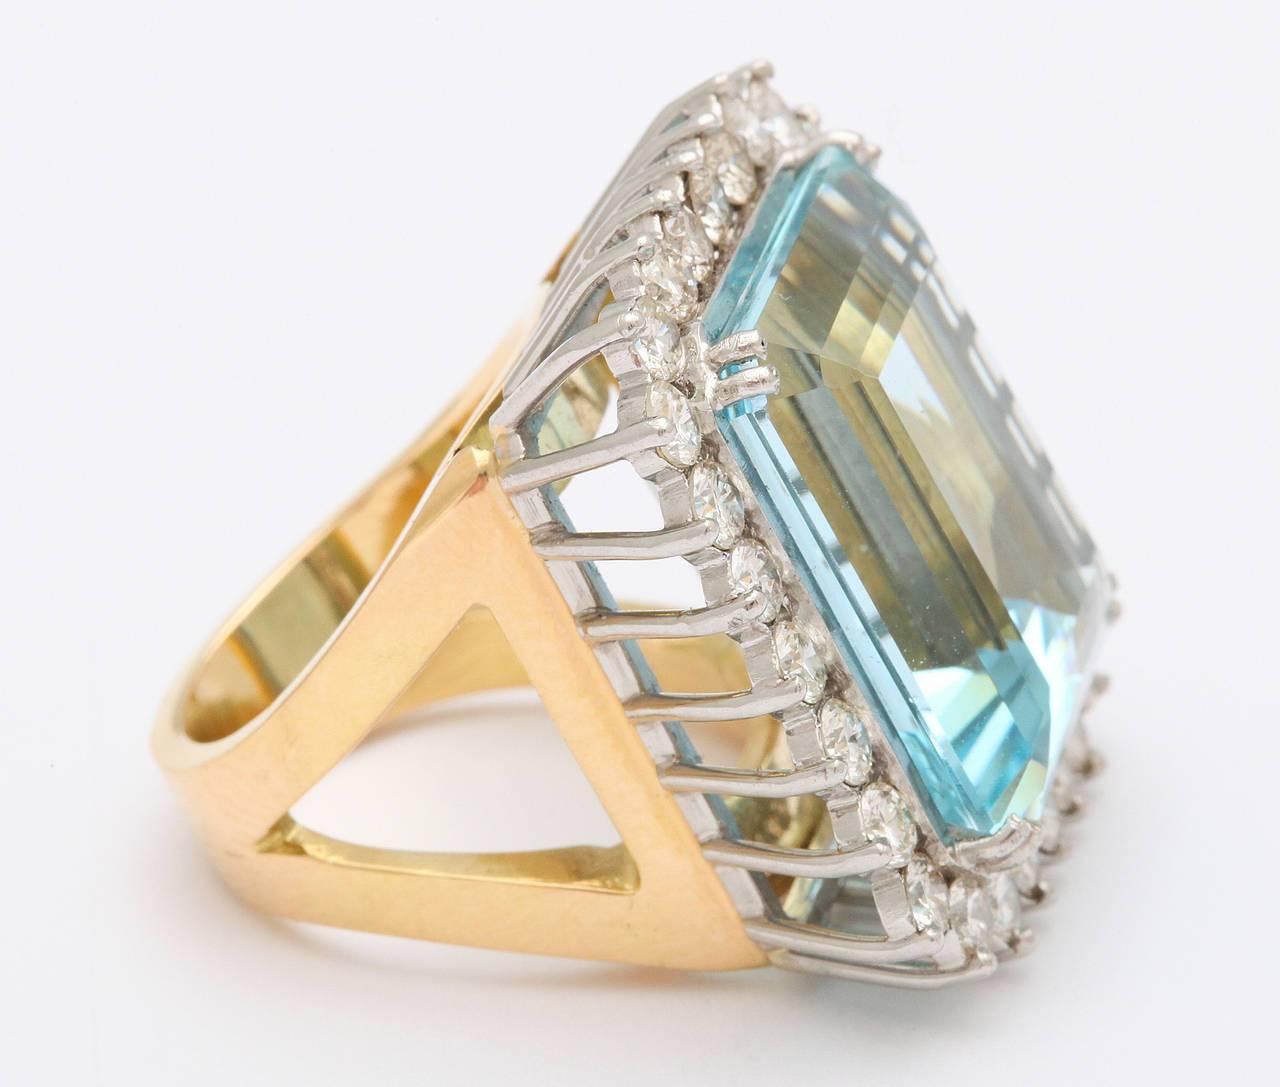 A fantastic 30-carat aquamarine ring surrounded by diamonds and set in platinum and mounted on 18-karat gold. 